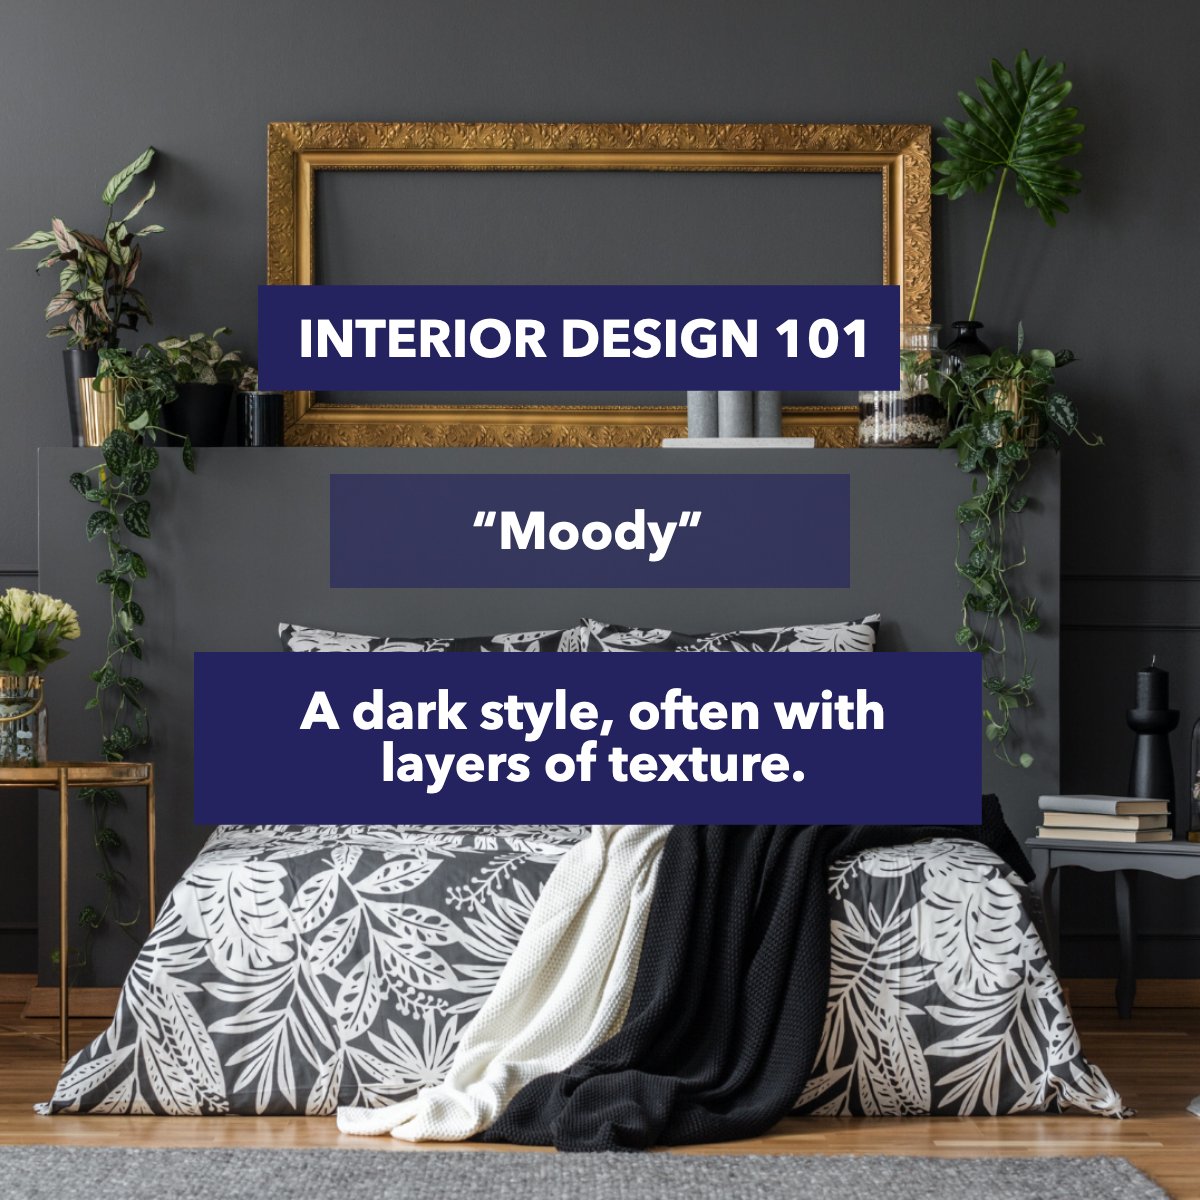 Moody is not only a mood is a style in interior design. 

Are you feeling moody? 

#interiorsdesign #interiortrends #interiordesigning #interiordesigntrends #interiorsaddict #interiordesigntips #interiordesigngoals 
 #HoustonLuxuryHomes #HoustonHomeShopping